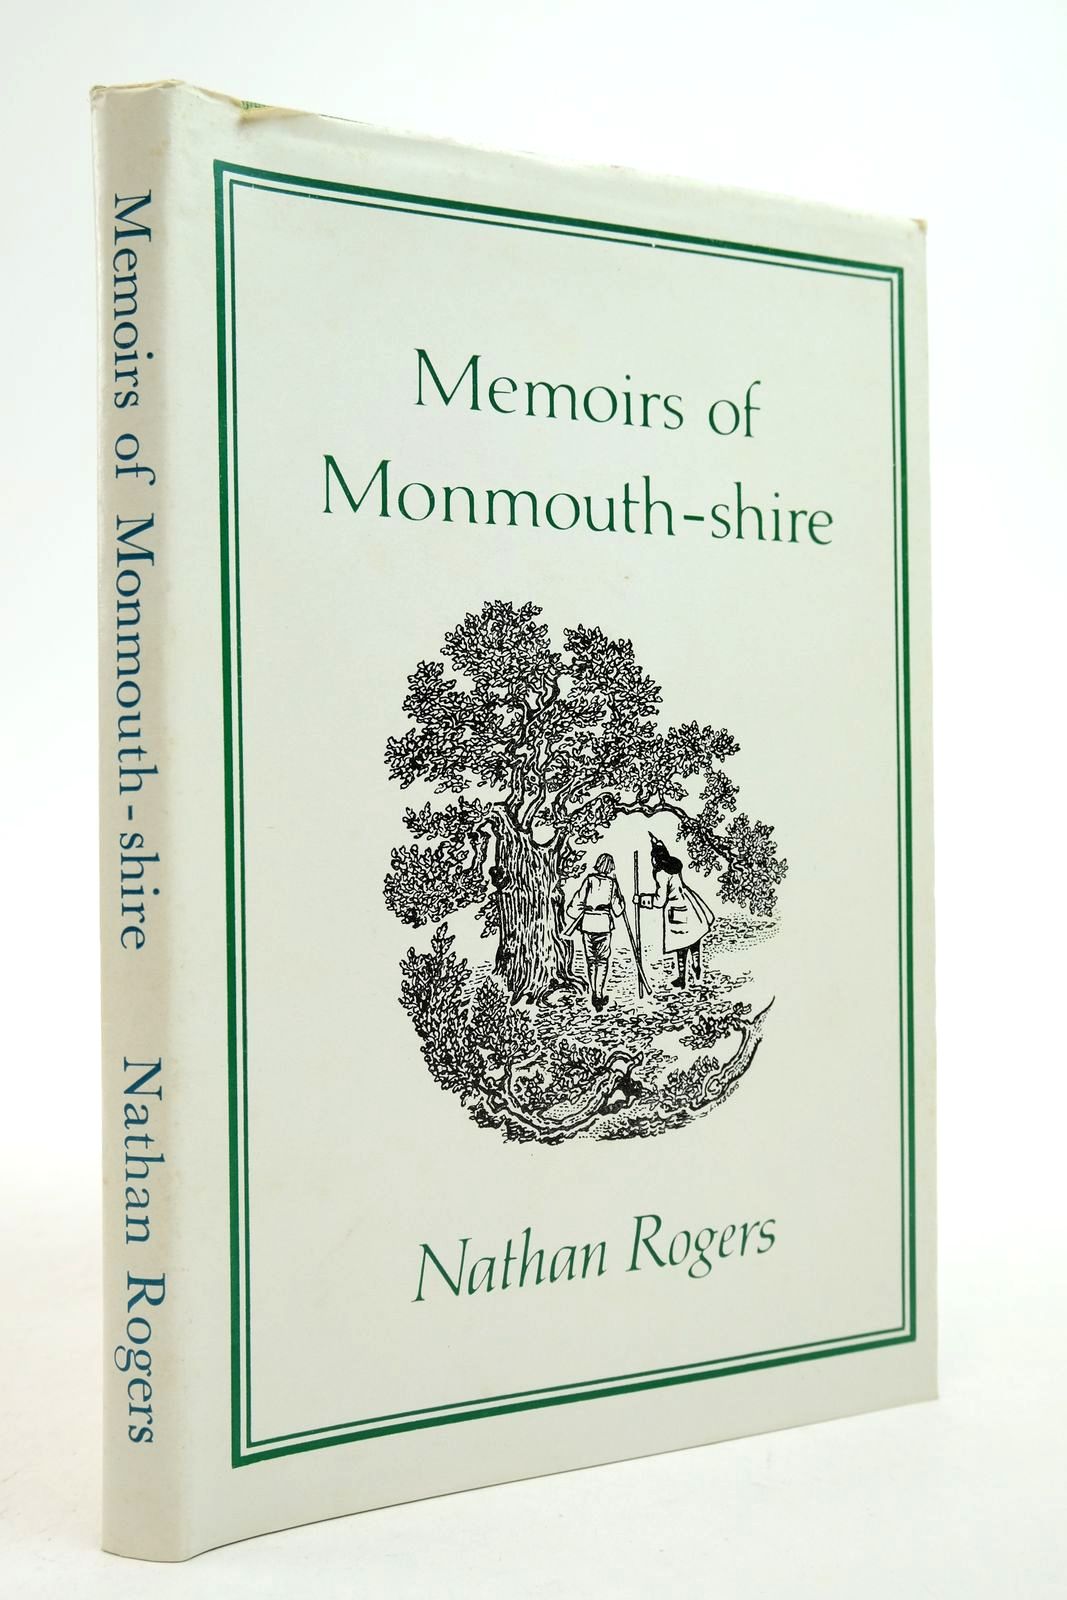 Photo of MEMOIRS OF MONMOUTH-SHIRE 1708- Stock Number: 2140450